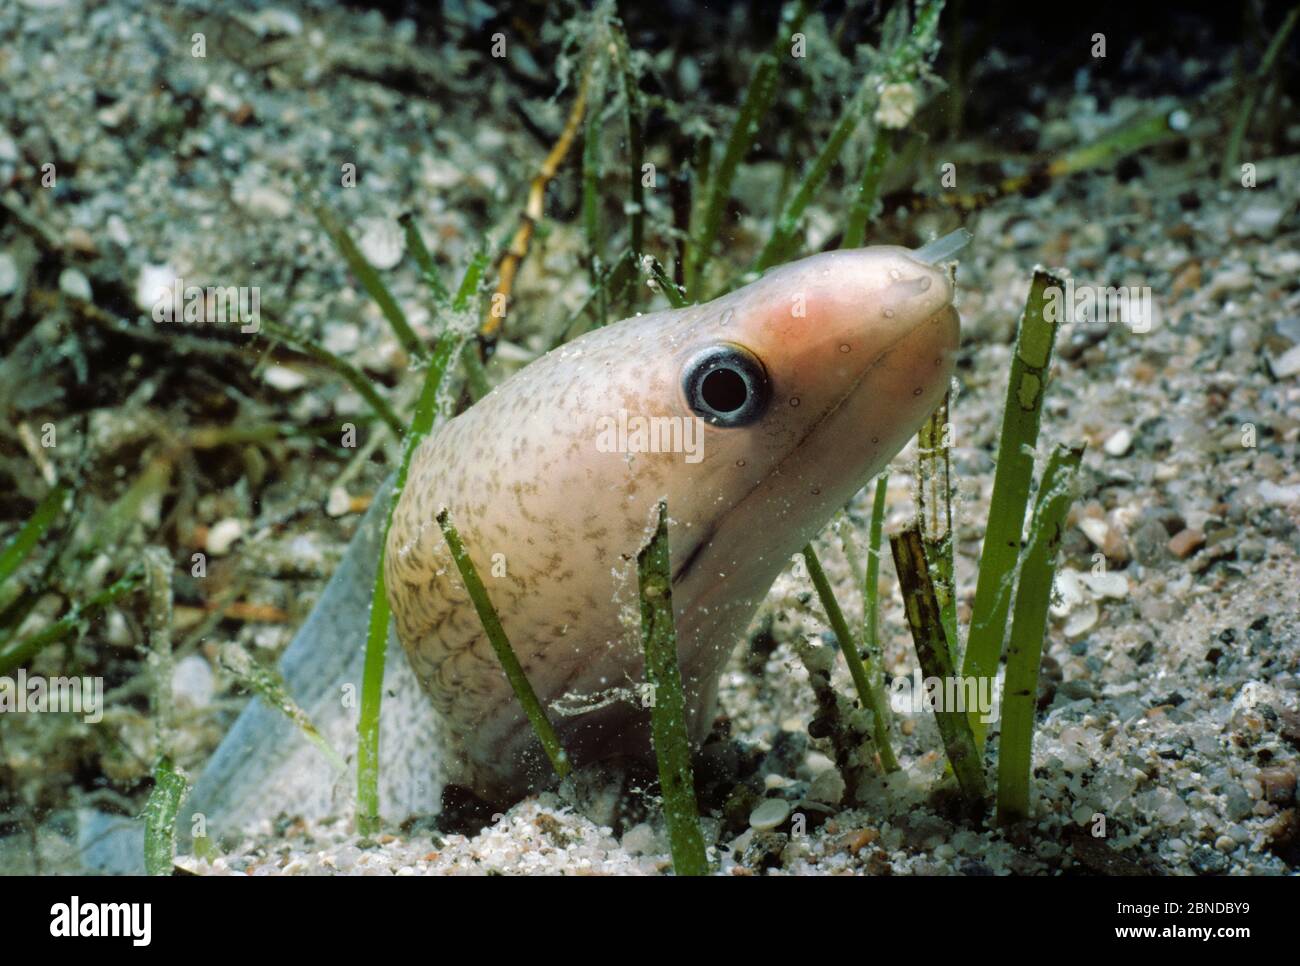 Whitespotted moray eel (Gymnothorax punctatus) in eel grass, Red Sea. Stock Photo